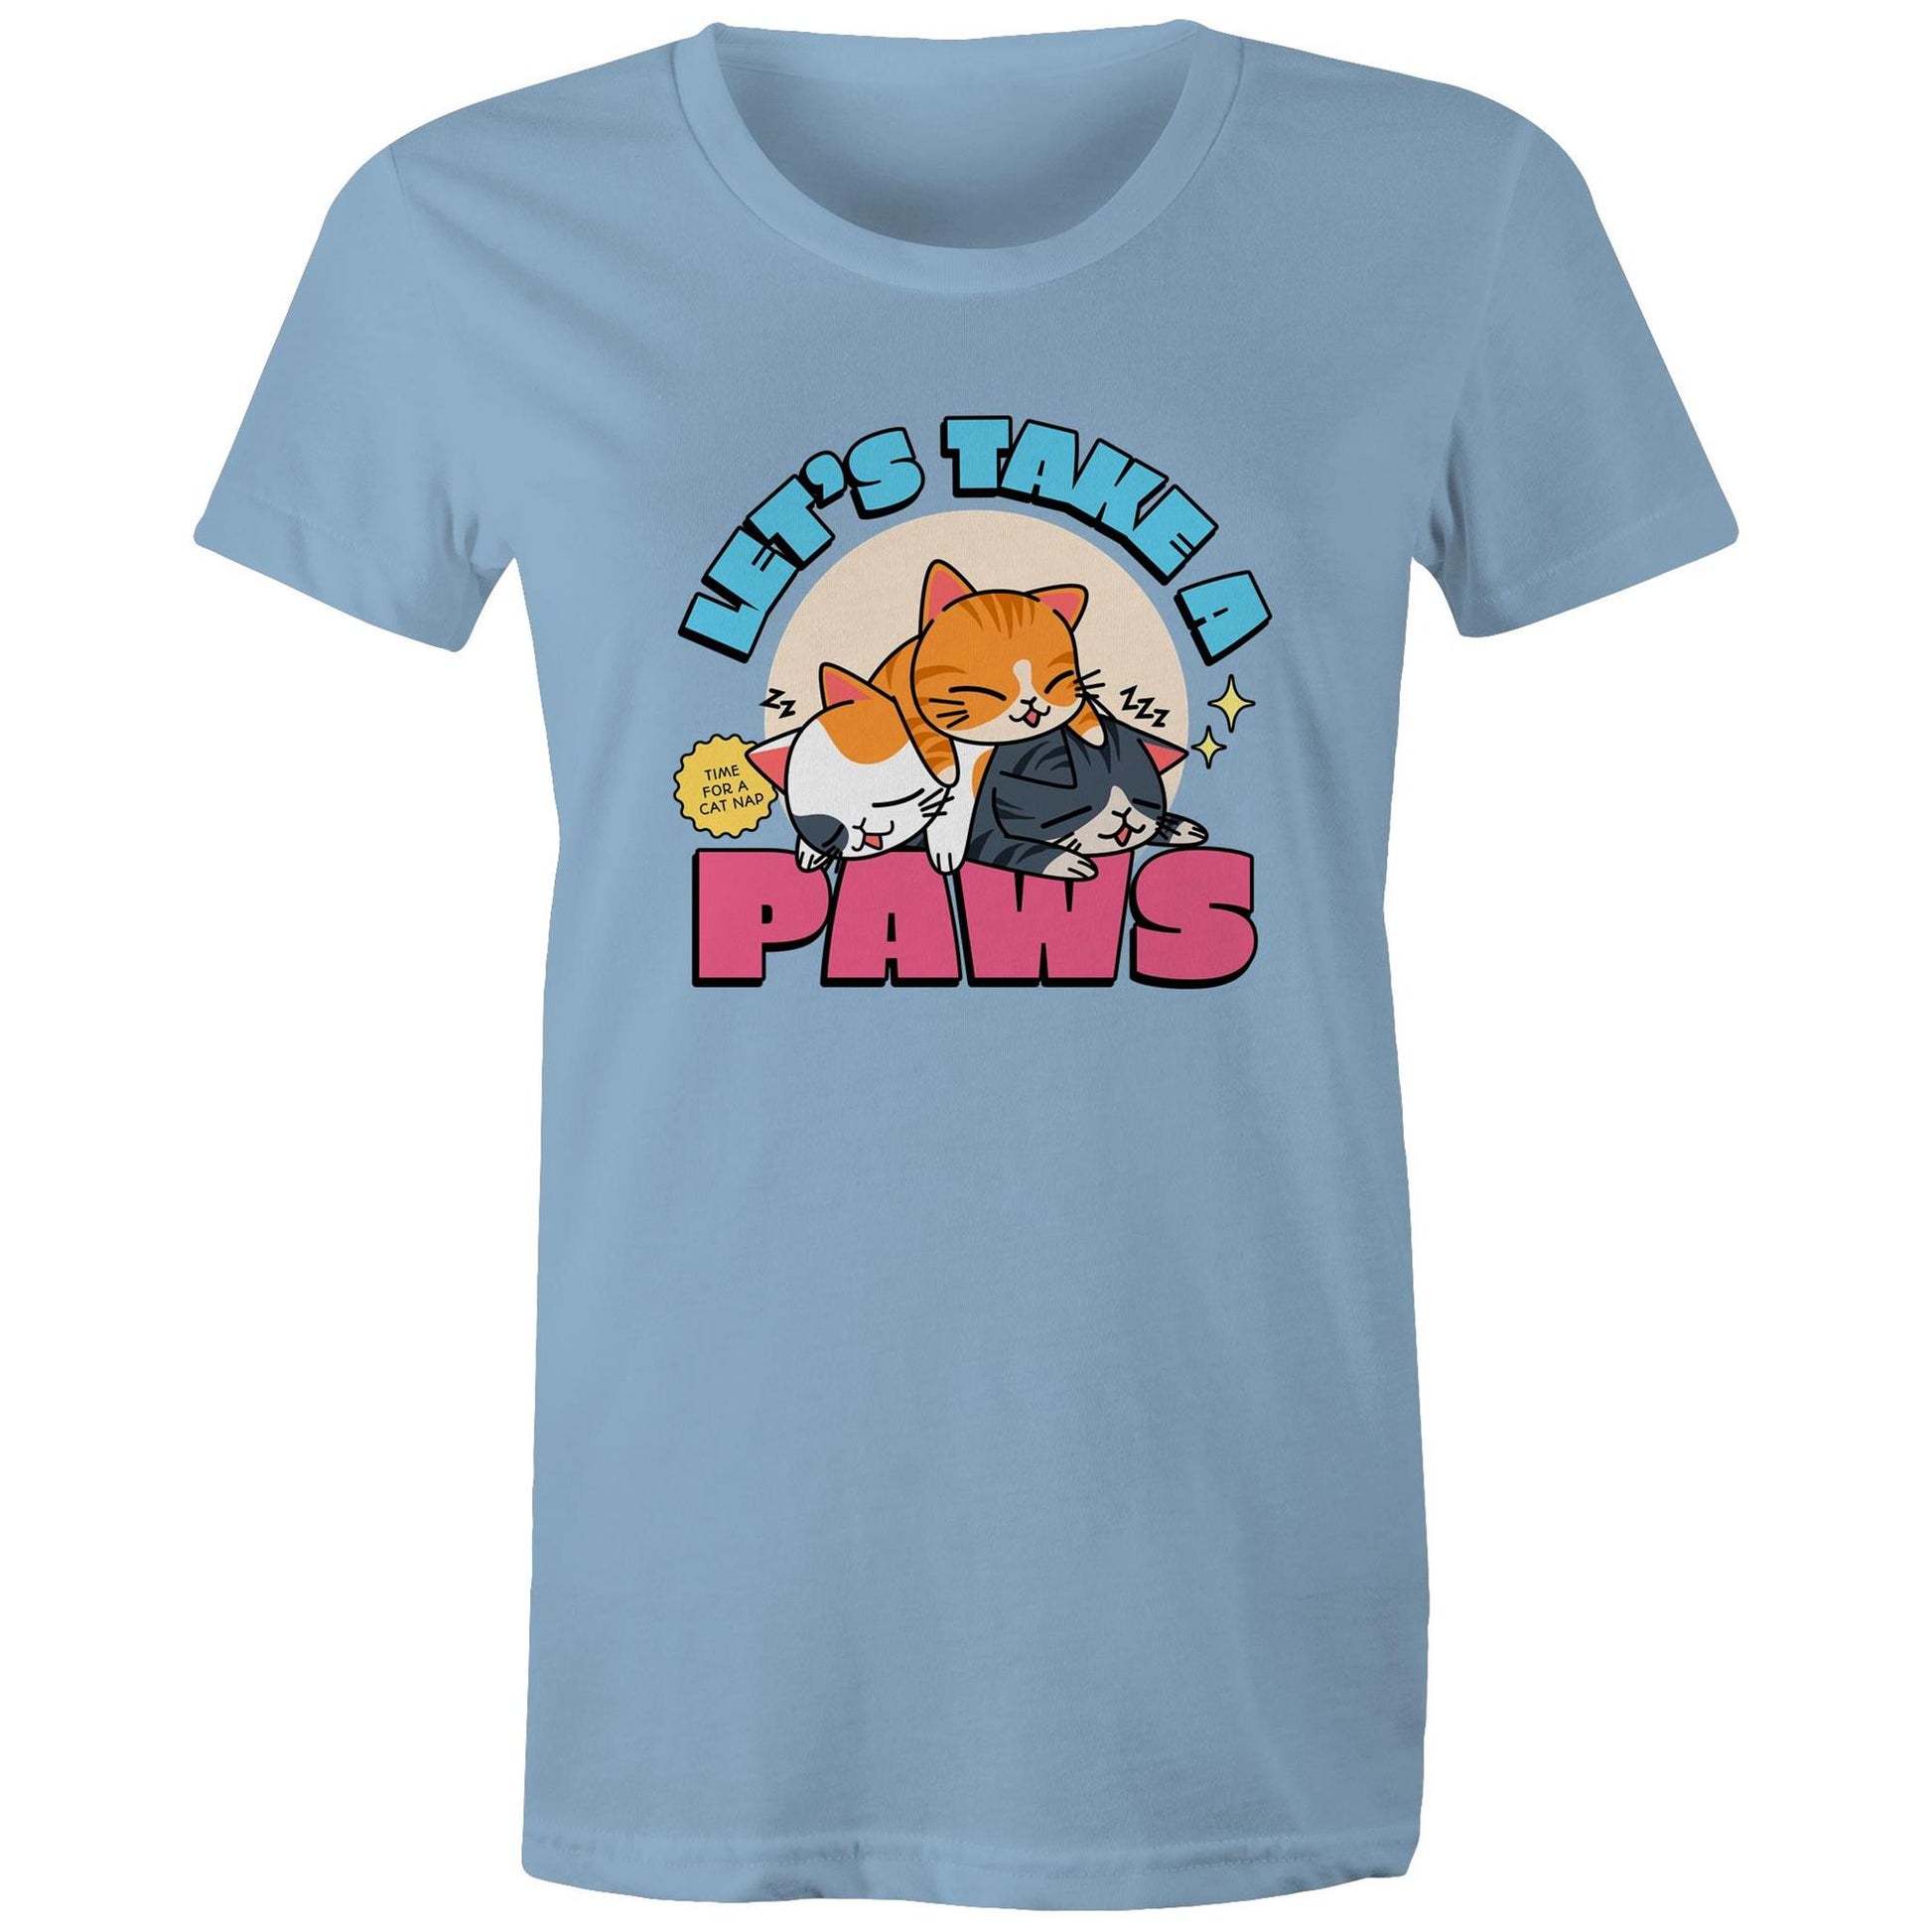 Let's Take A Paws, Time For A Cat Nap - Womens T-shirt Carolina Blue Womens T-shirt animal